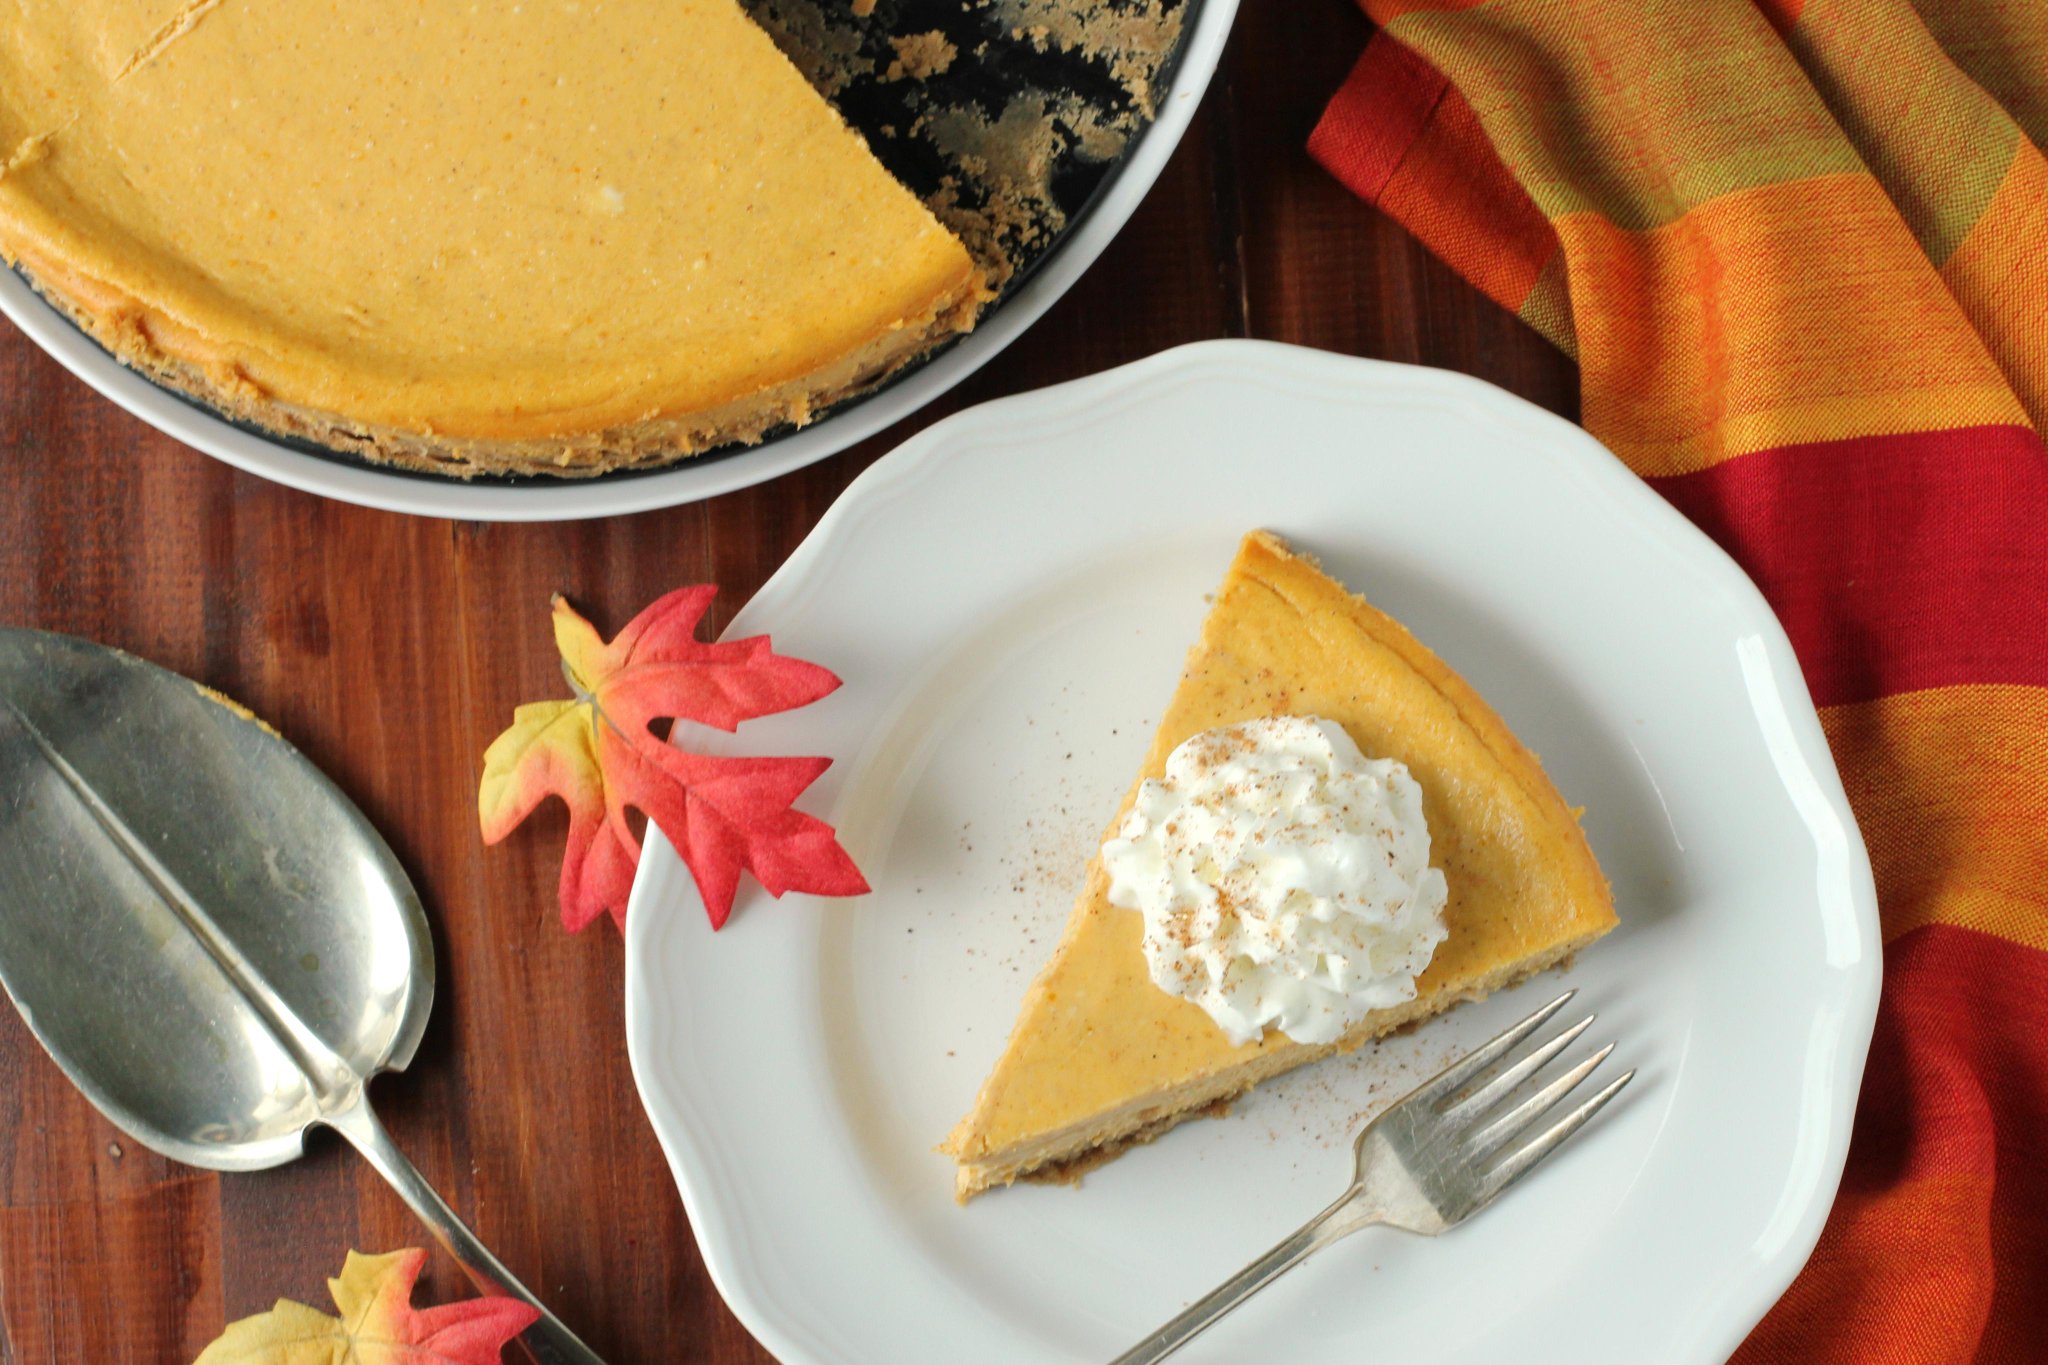 “Recipe of the Day: Pumpkin Cheesecake 🎃 https://t.co/RqyyifeeRf!” 